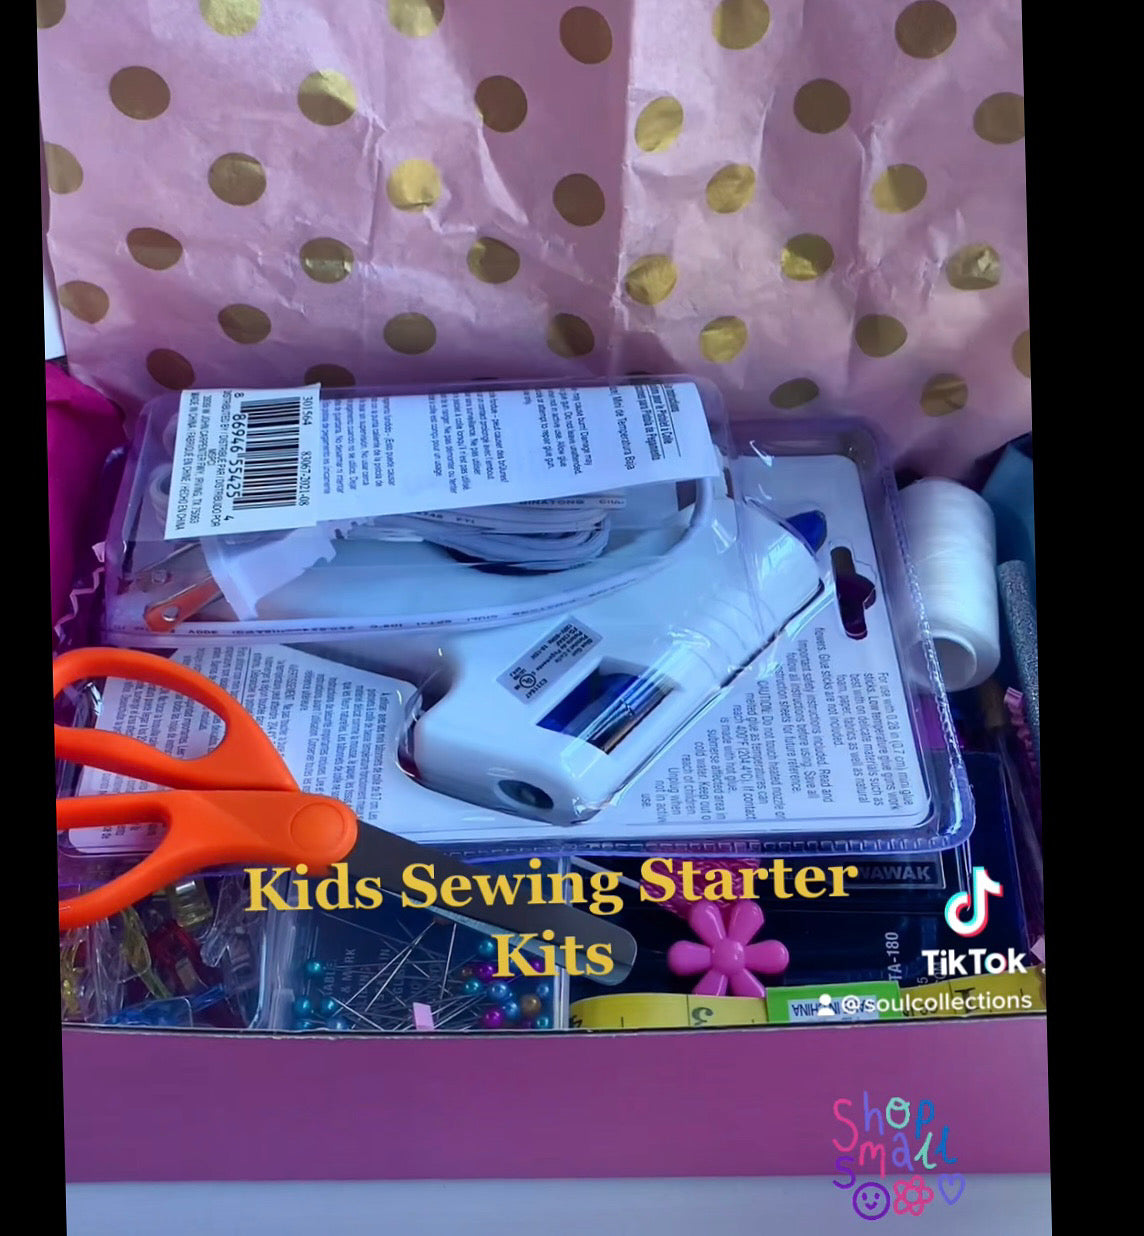 Soul Collection's Sewing Lounge - Kids Sewing Starter Kits